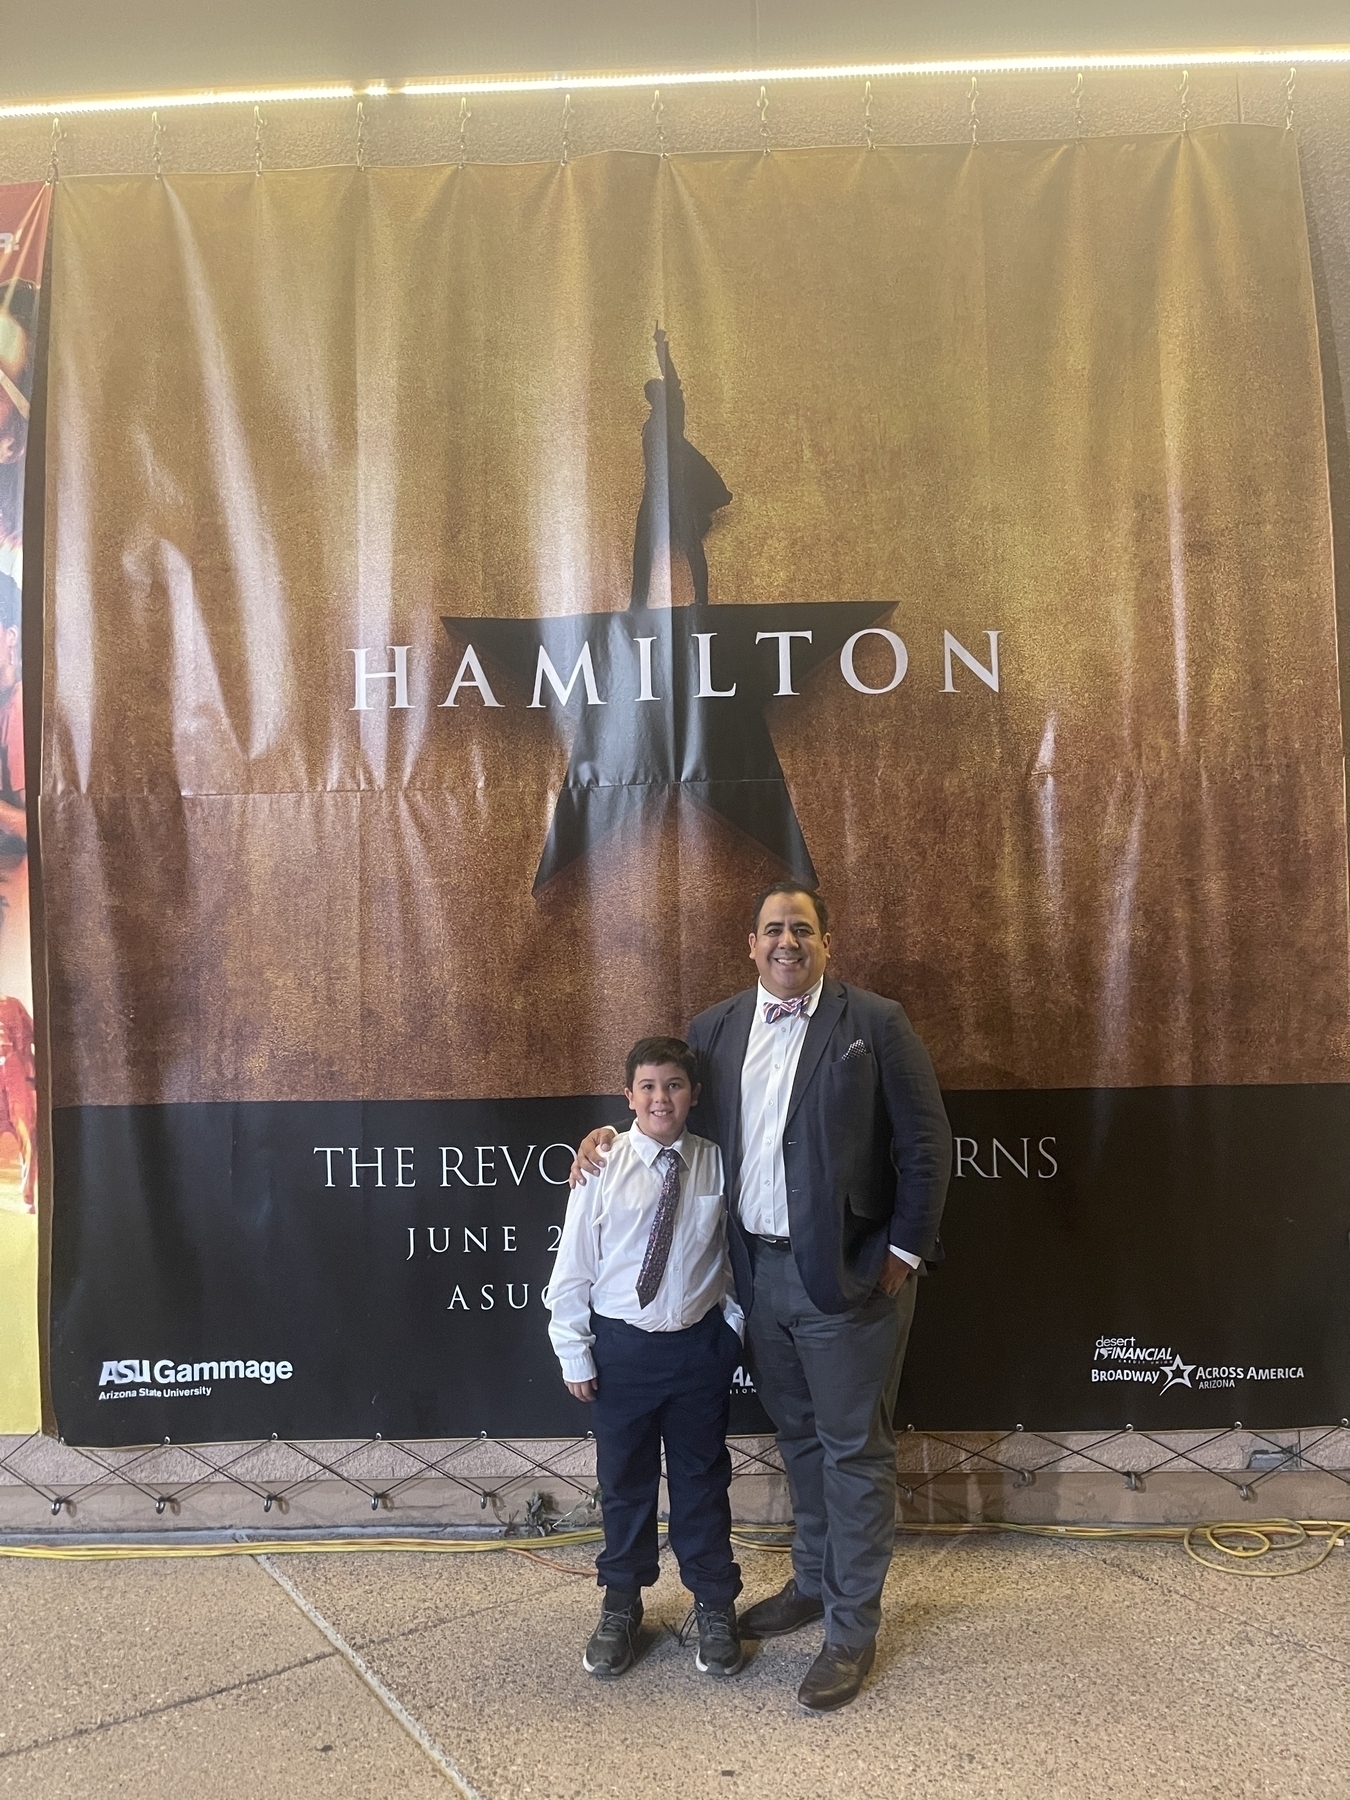 Photo of father and son after seeing Hamilton, the musical, in Tempe Arizona.